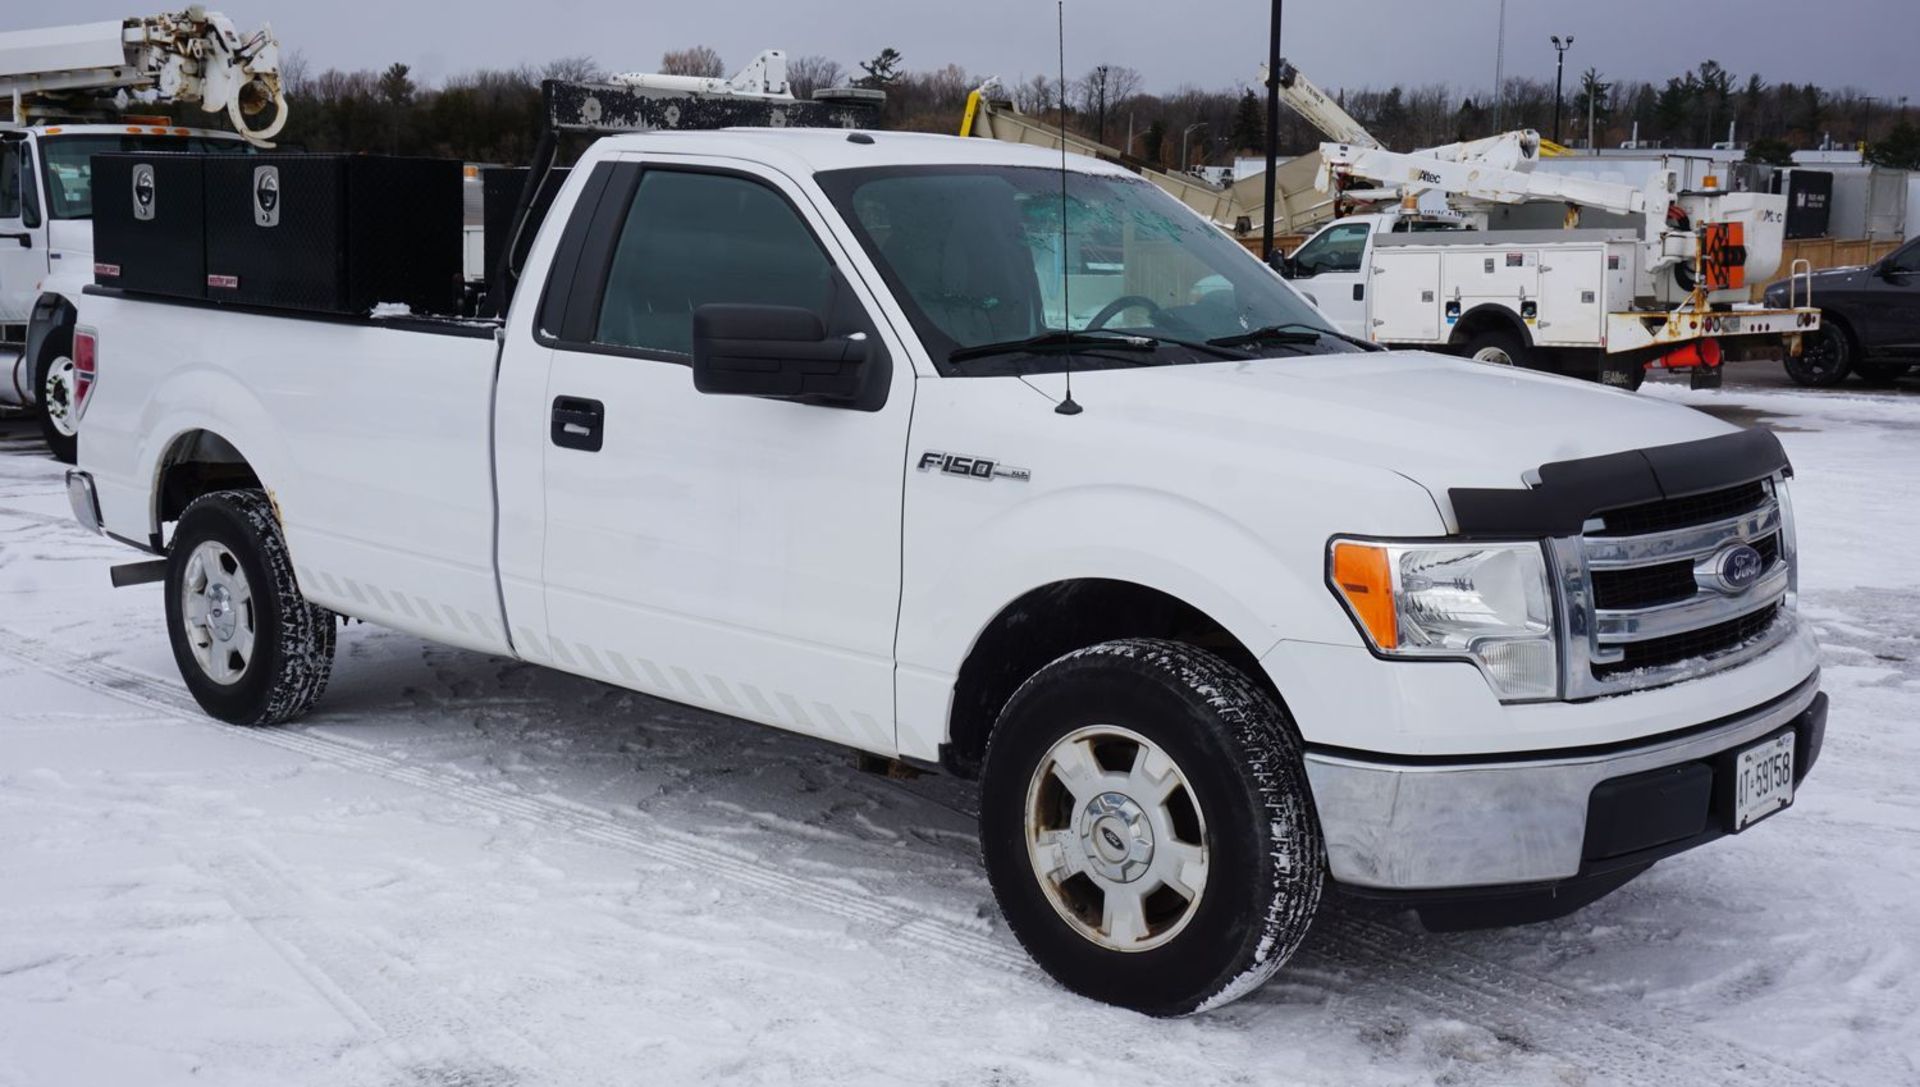 2014 FORD F150XL REG CAB 4X2 PICKUP W/ 5.0L V8 GAS ENGINE C/W (2) WEATHER GUARD HI-SIDE TOOL BOXES, - Image 3 of 8